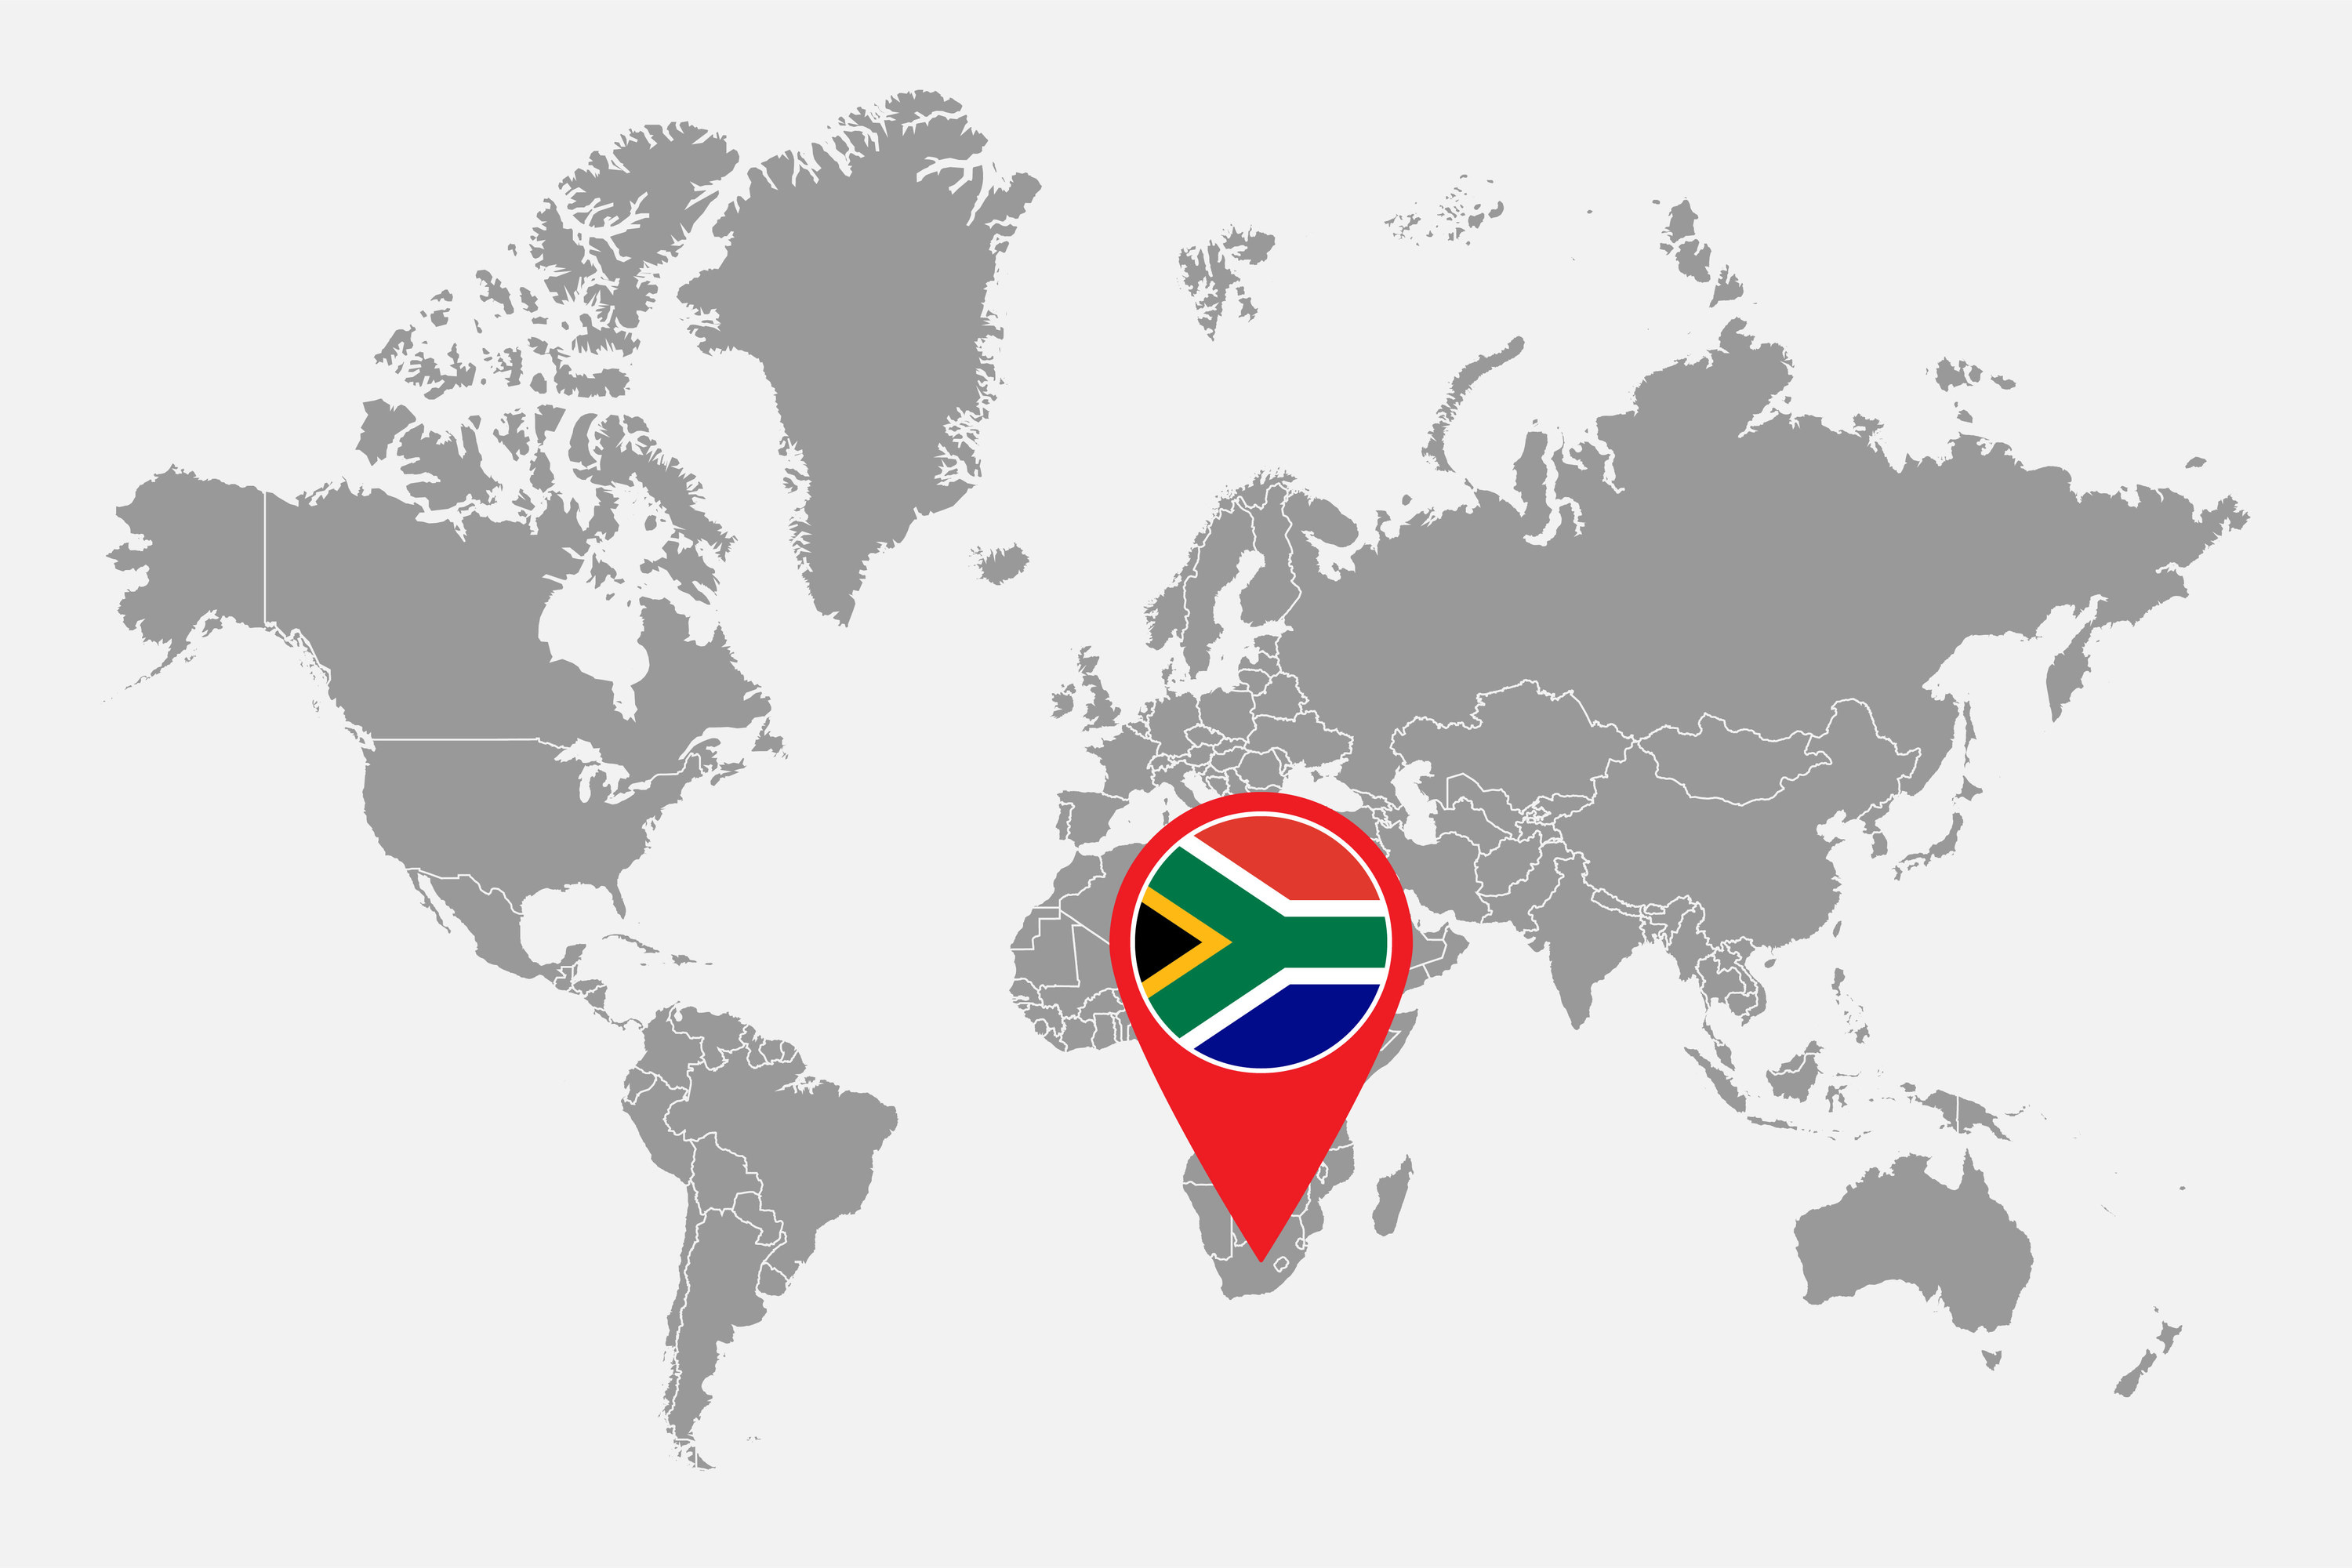 A world map with South Africa indicated